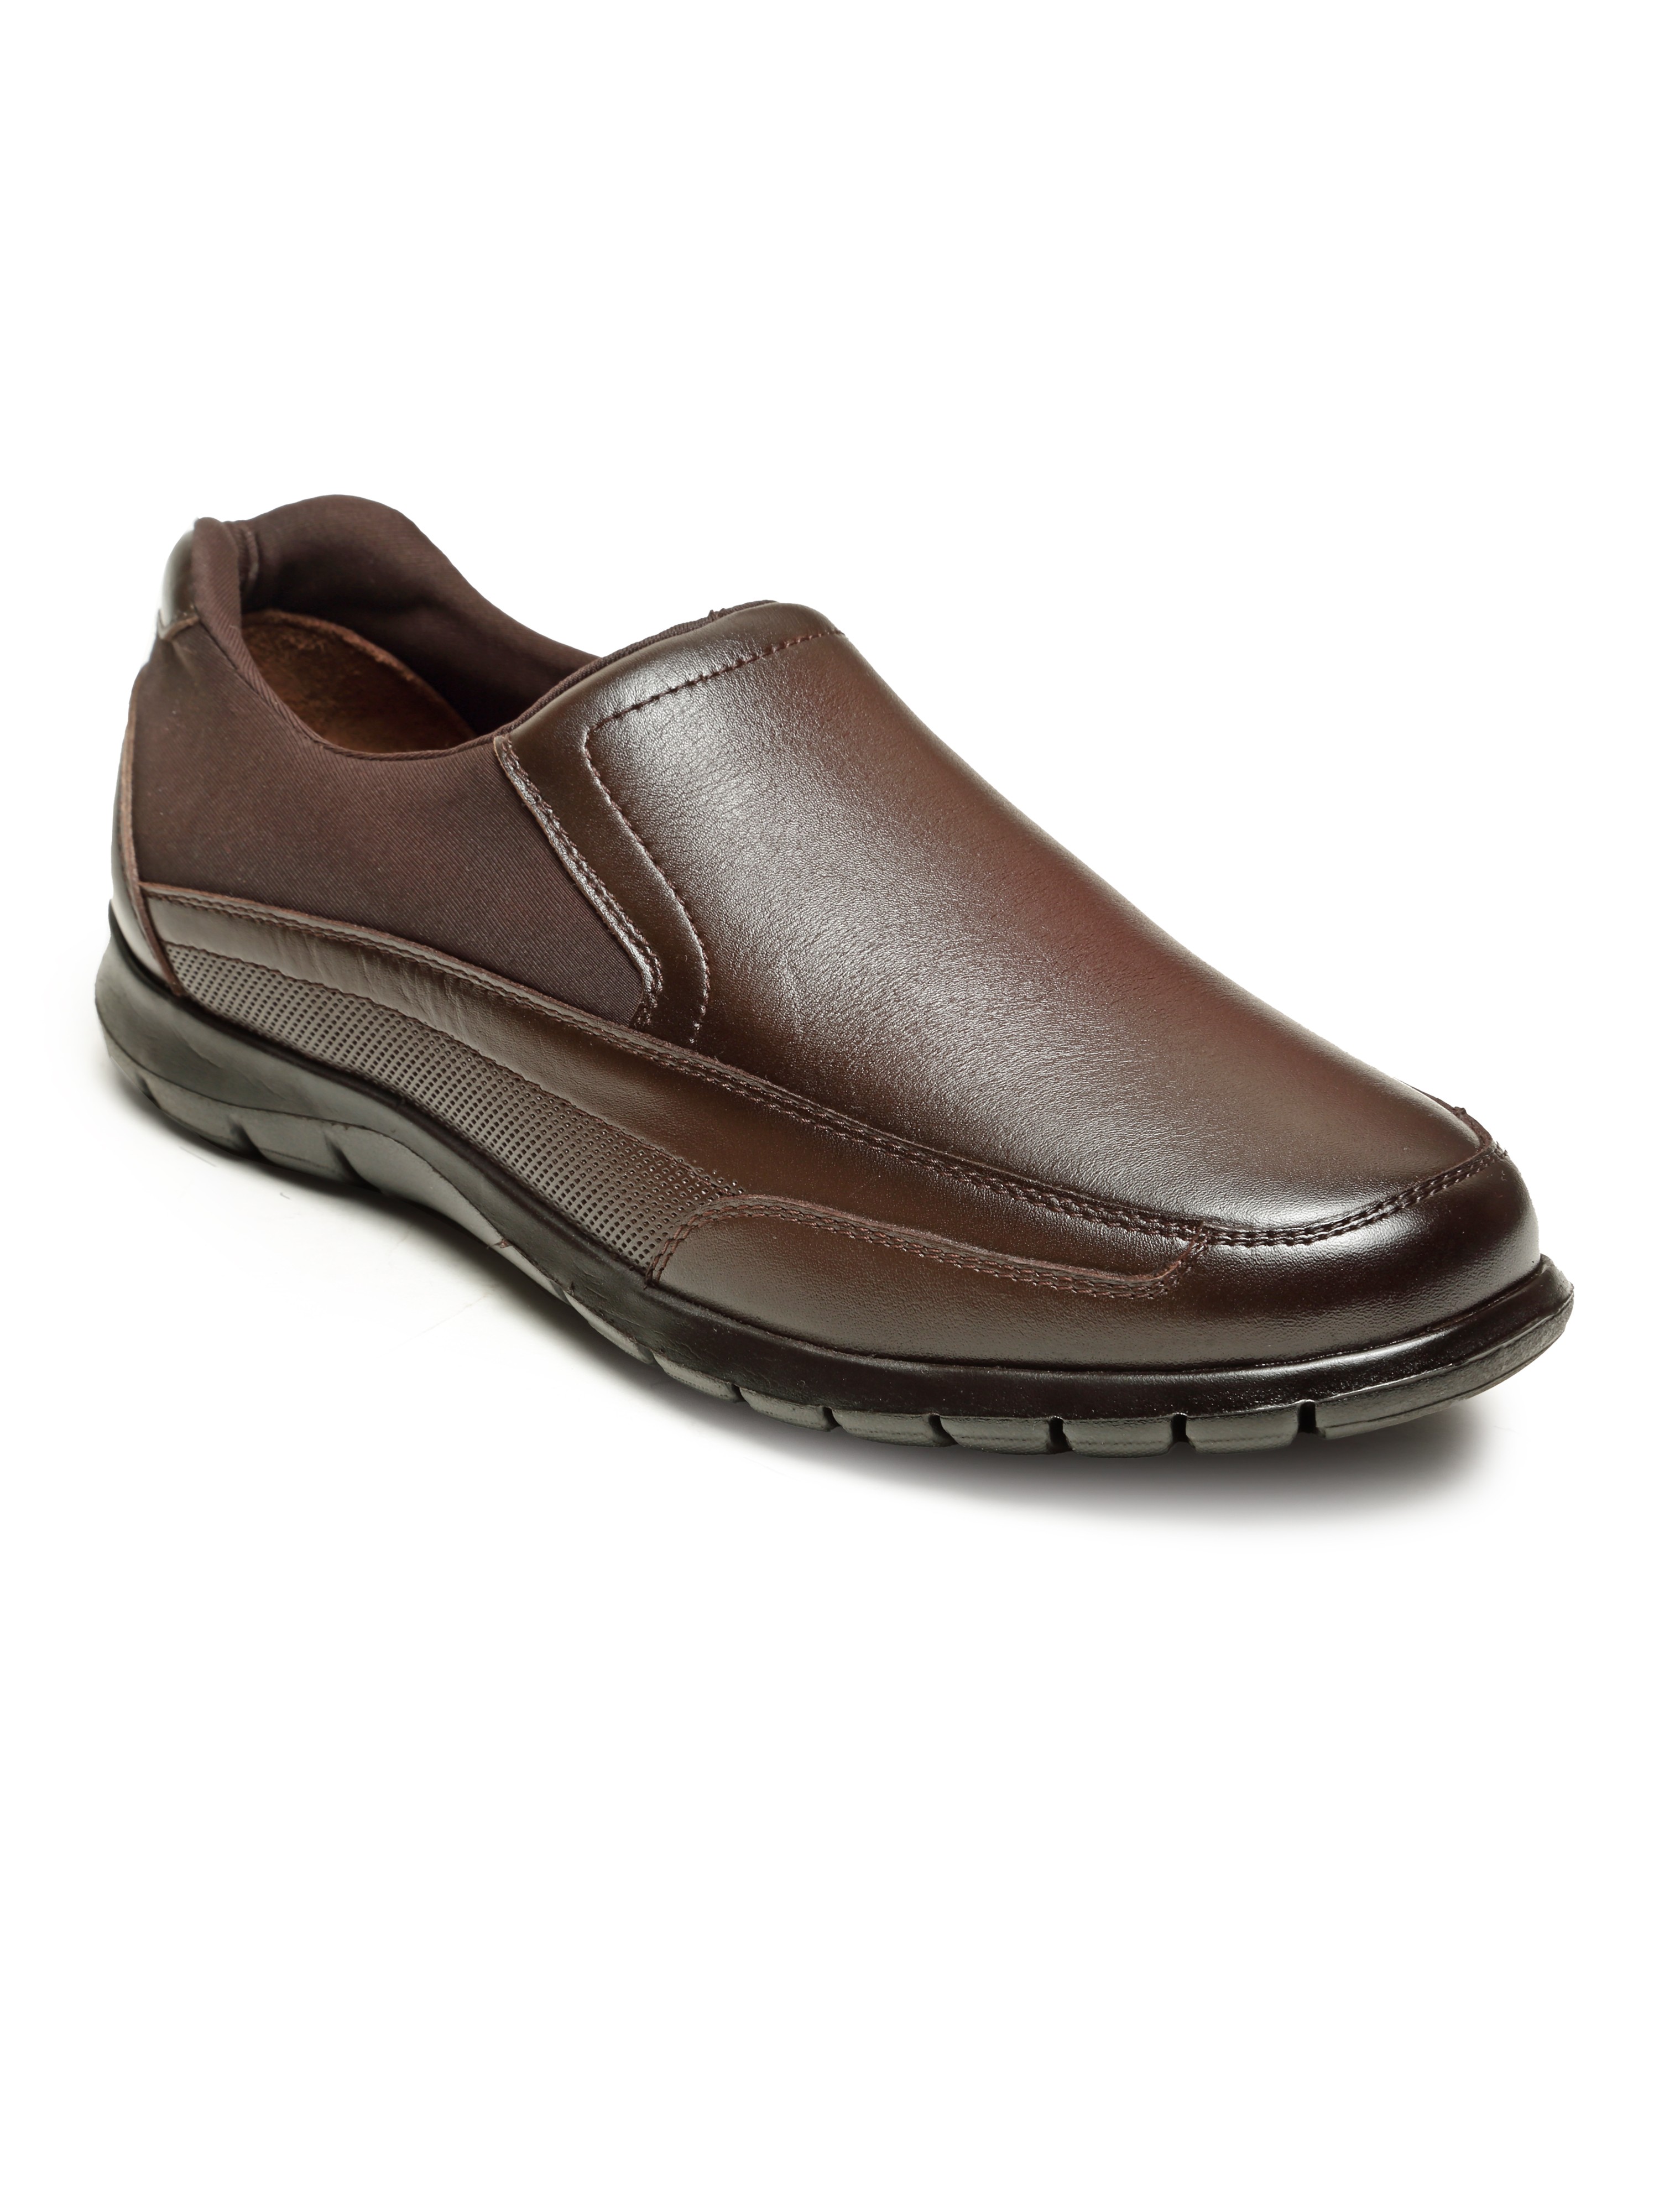 VON WELLX IGOR BROWN SHOES(SPECIALLY FOR DIABETIC FOOT)